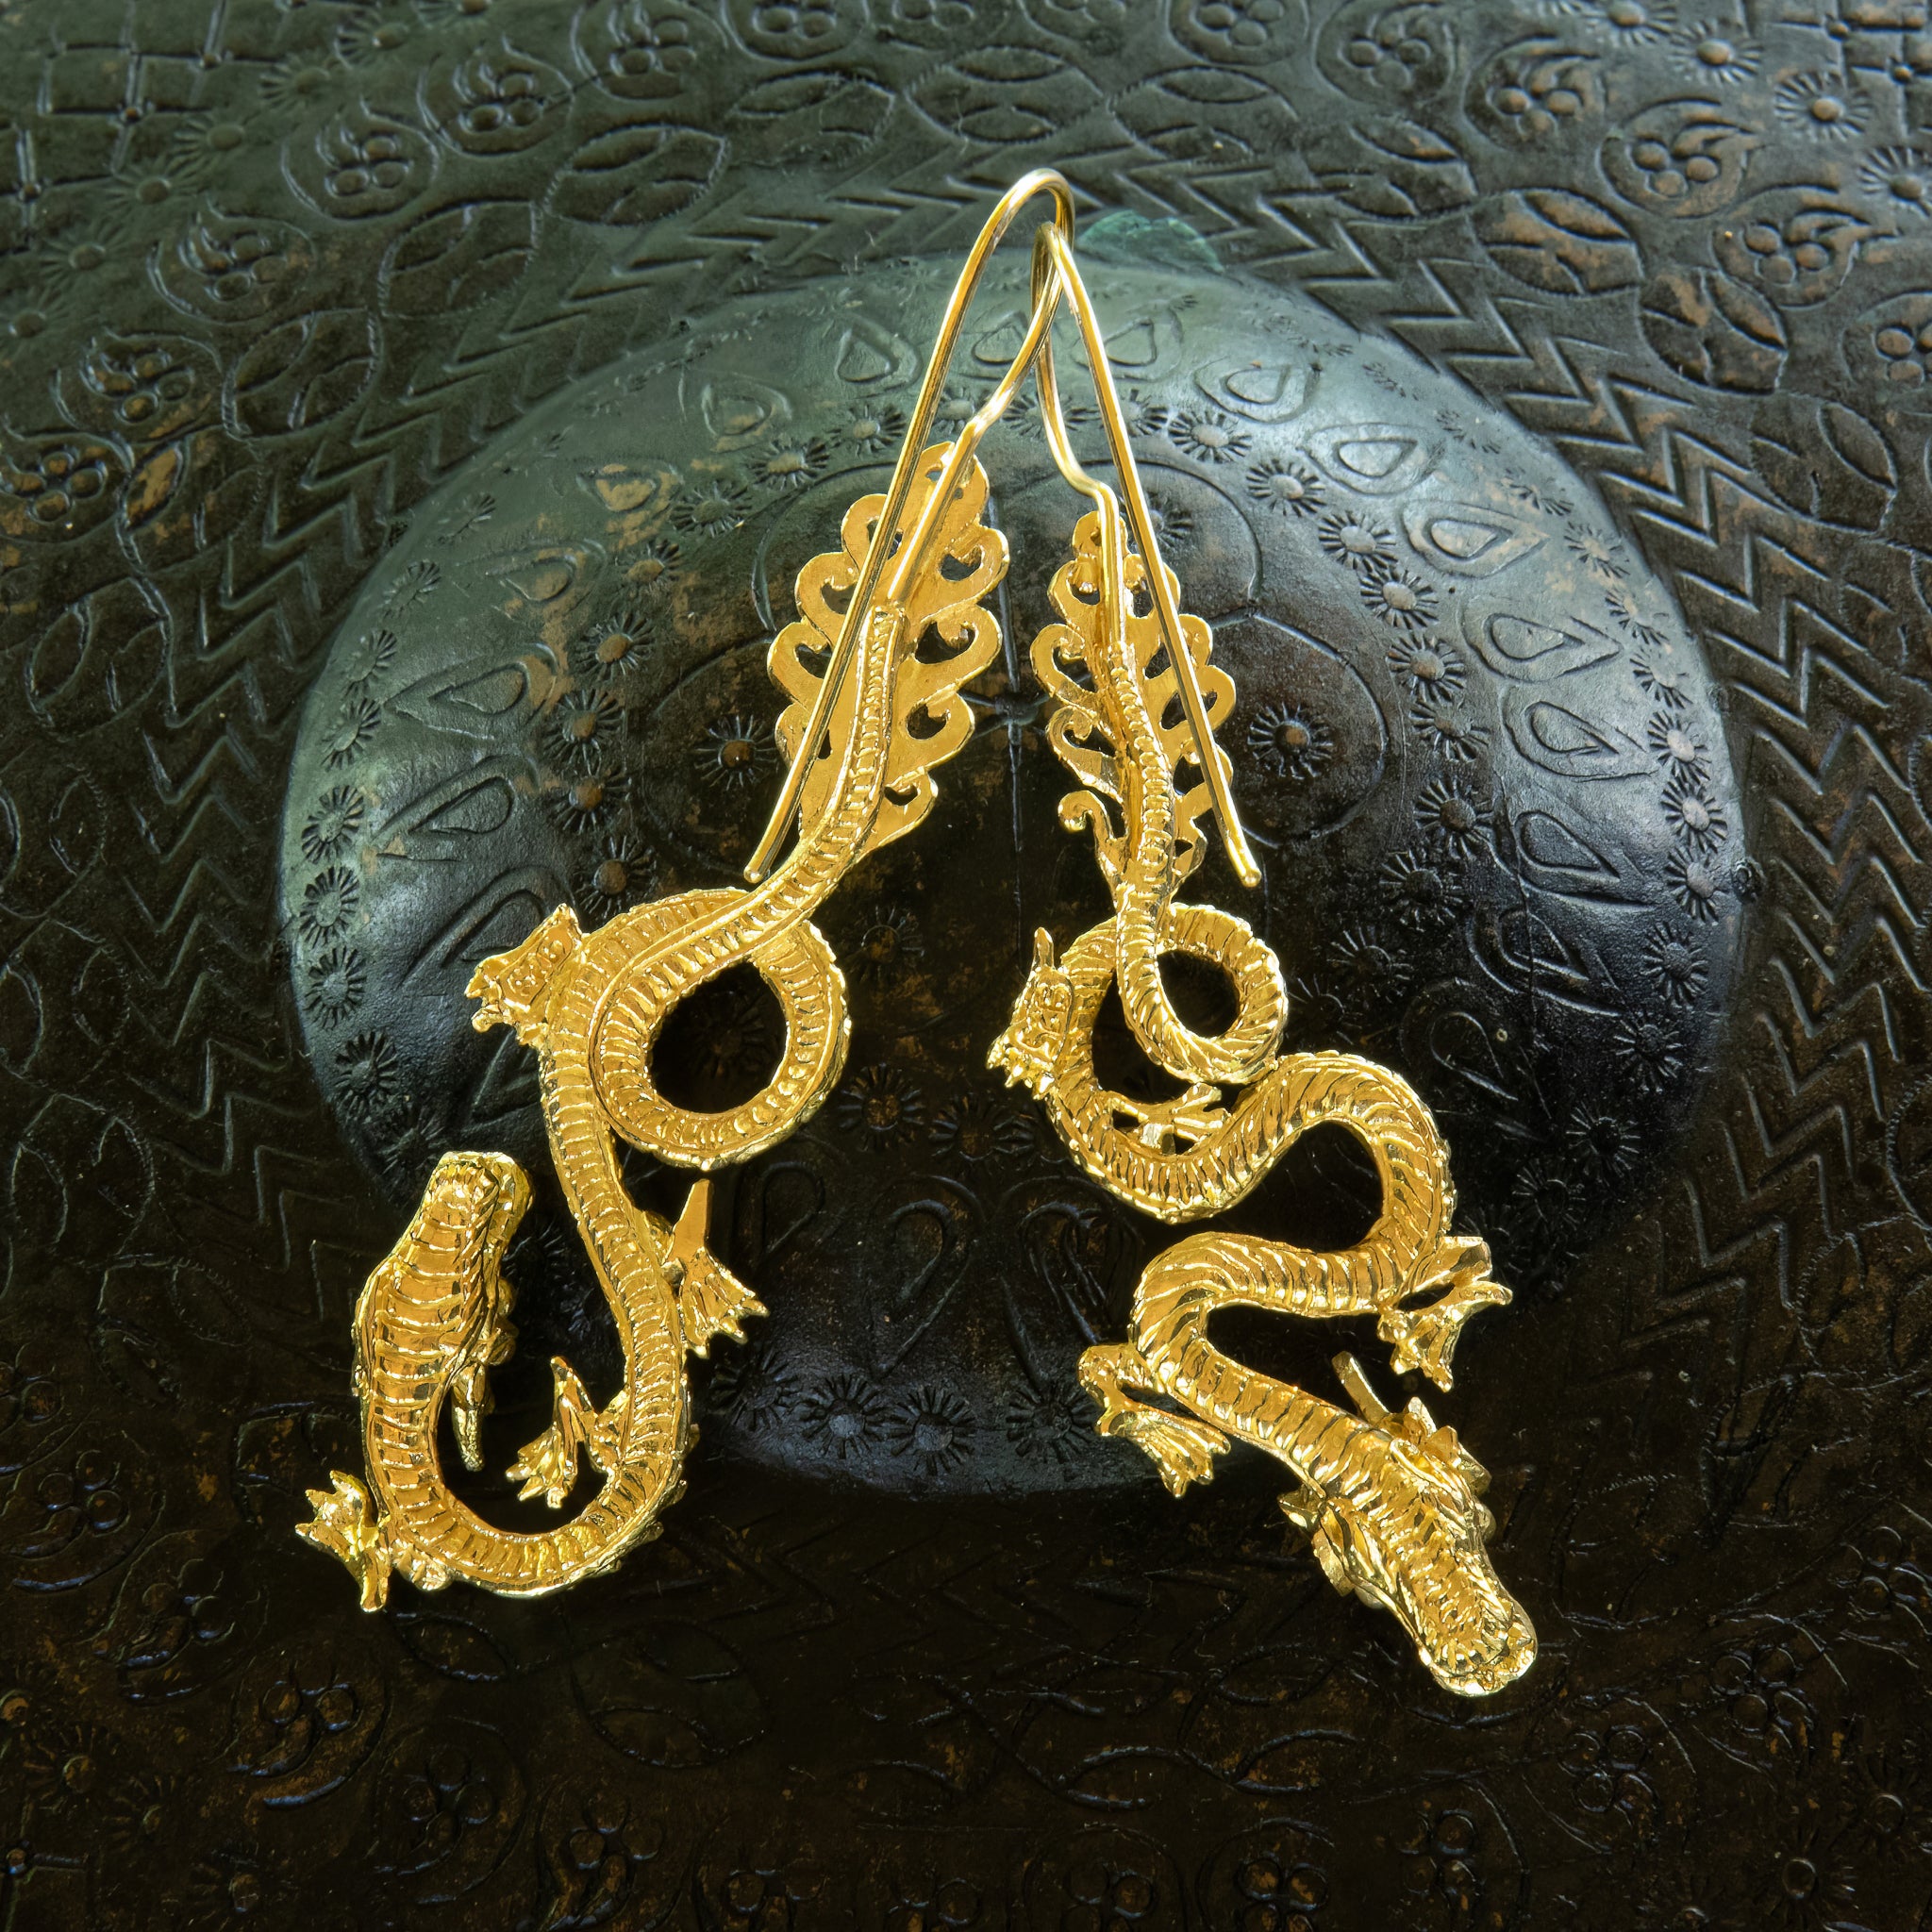 NEW ARRIVAL! Year of the Dragon Earrings